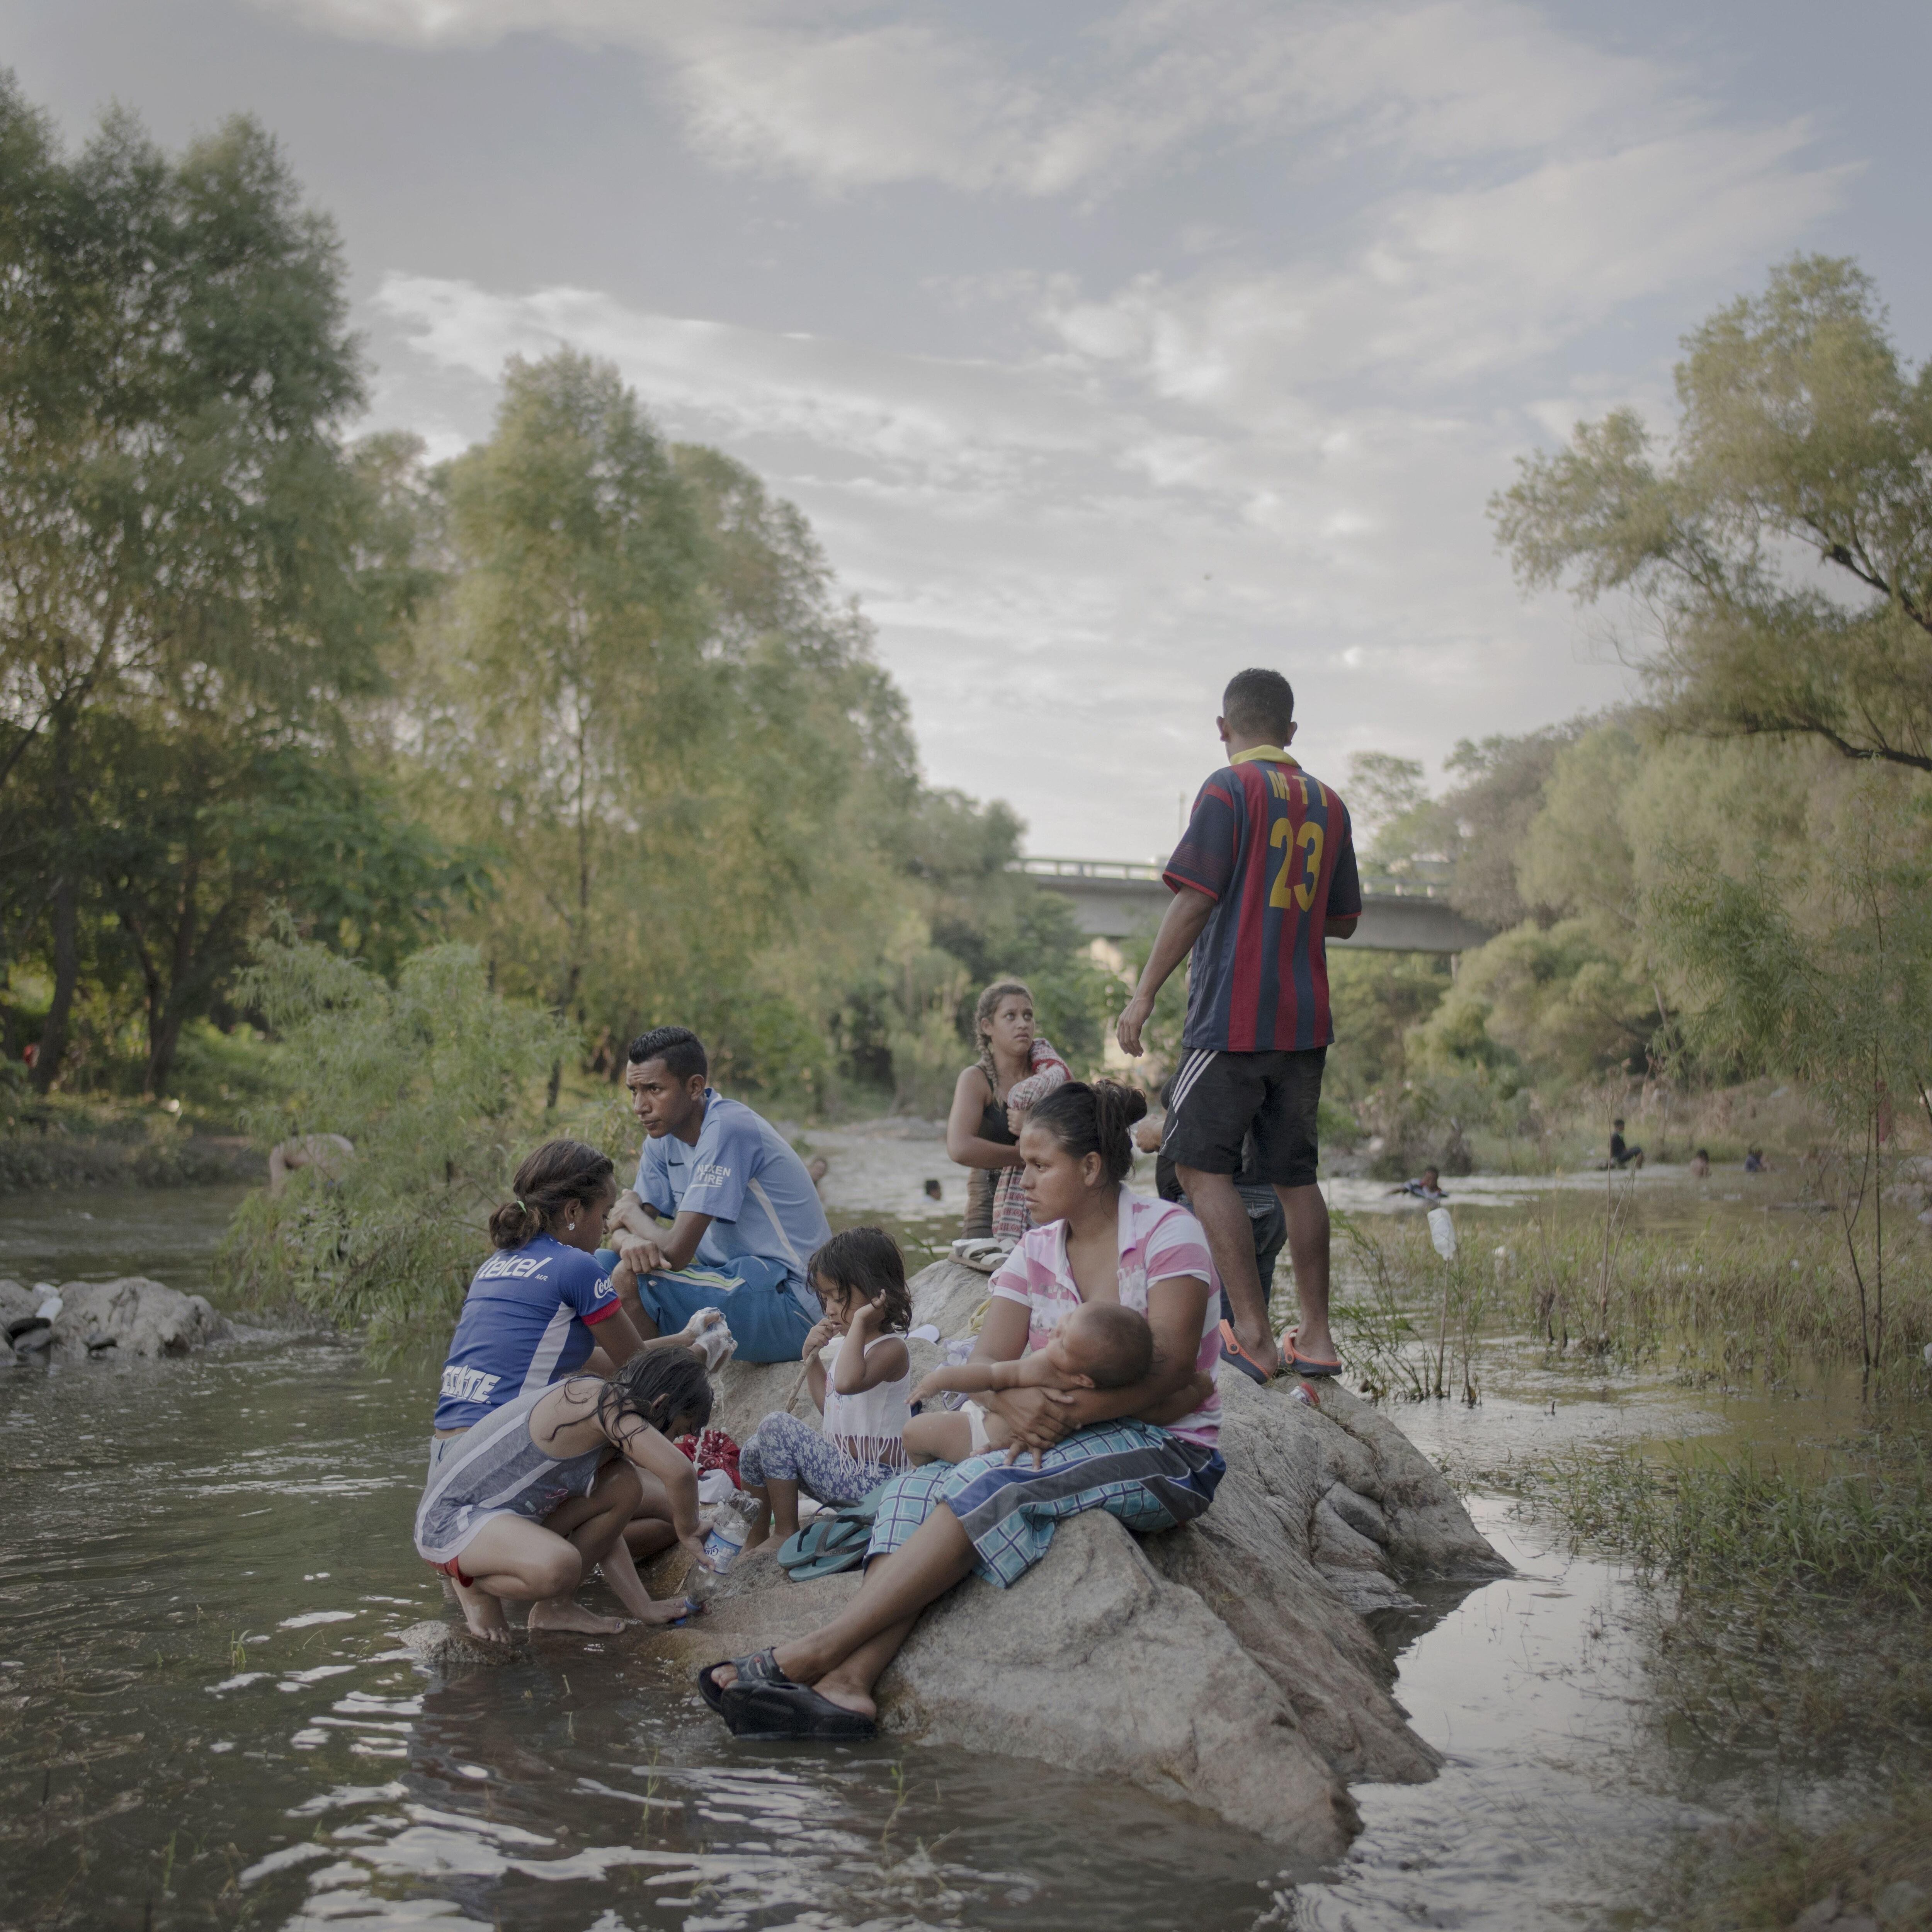 Image from 2019 that shows a family bathing during a day of rest for the migrant caravan heading to the north of the continent.  EFE